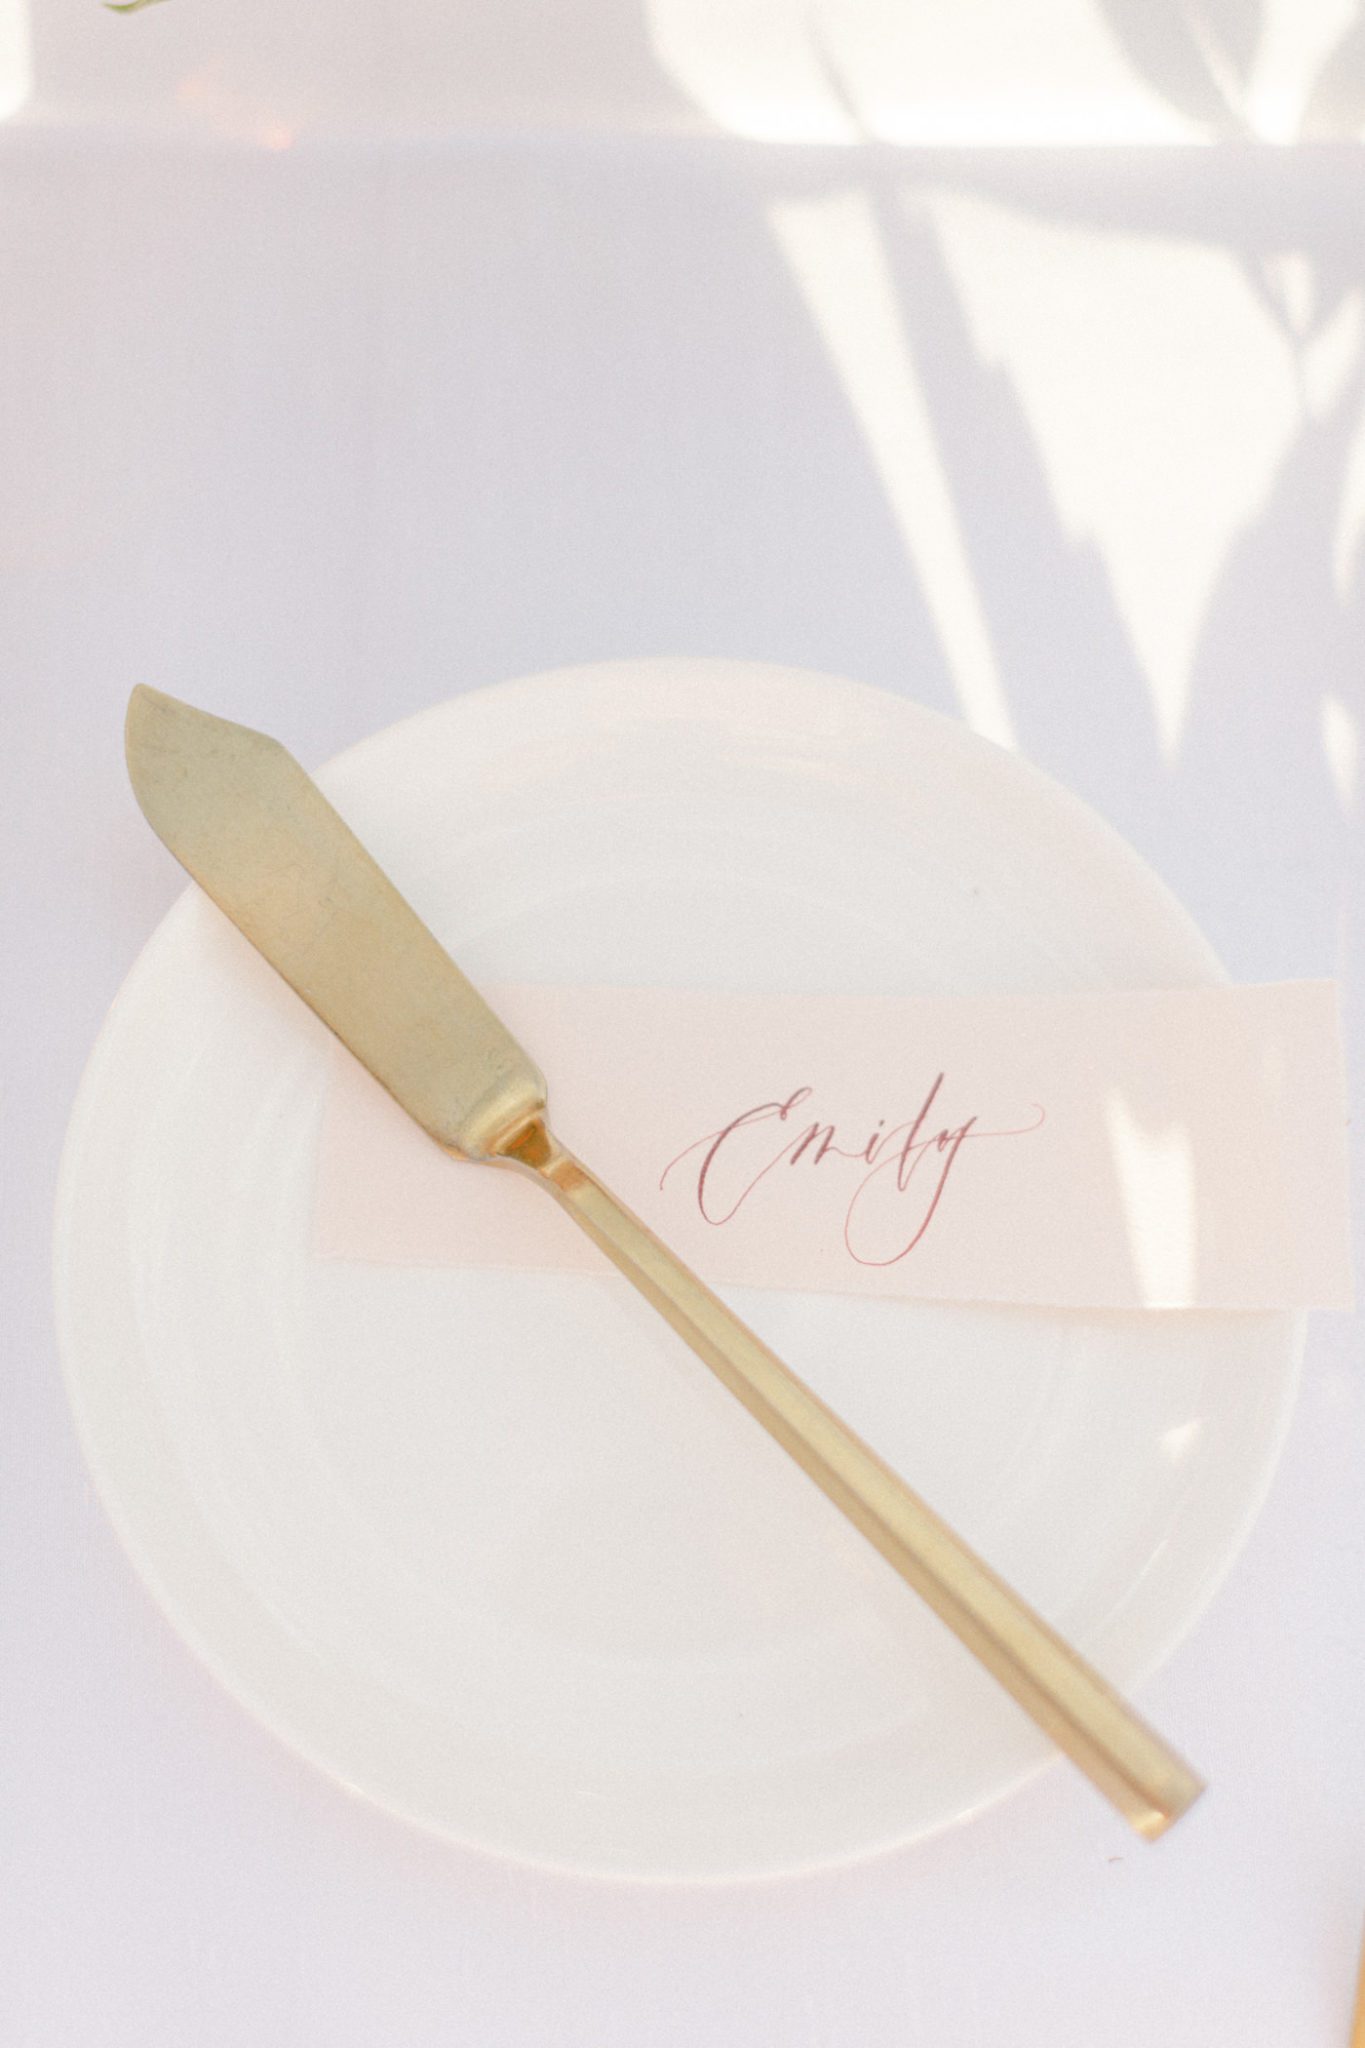 Romantic name place cards with gold accents